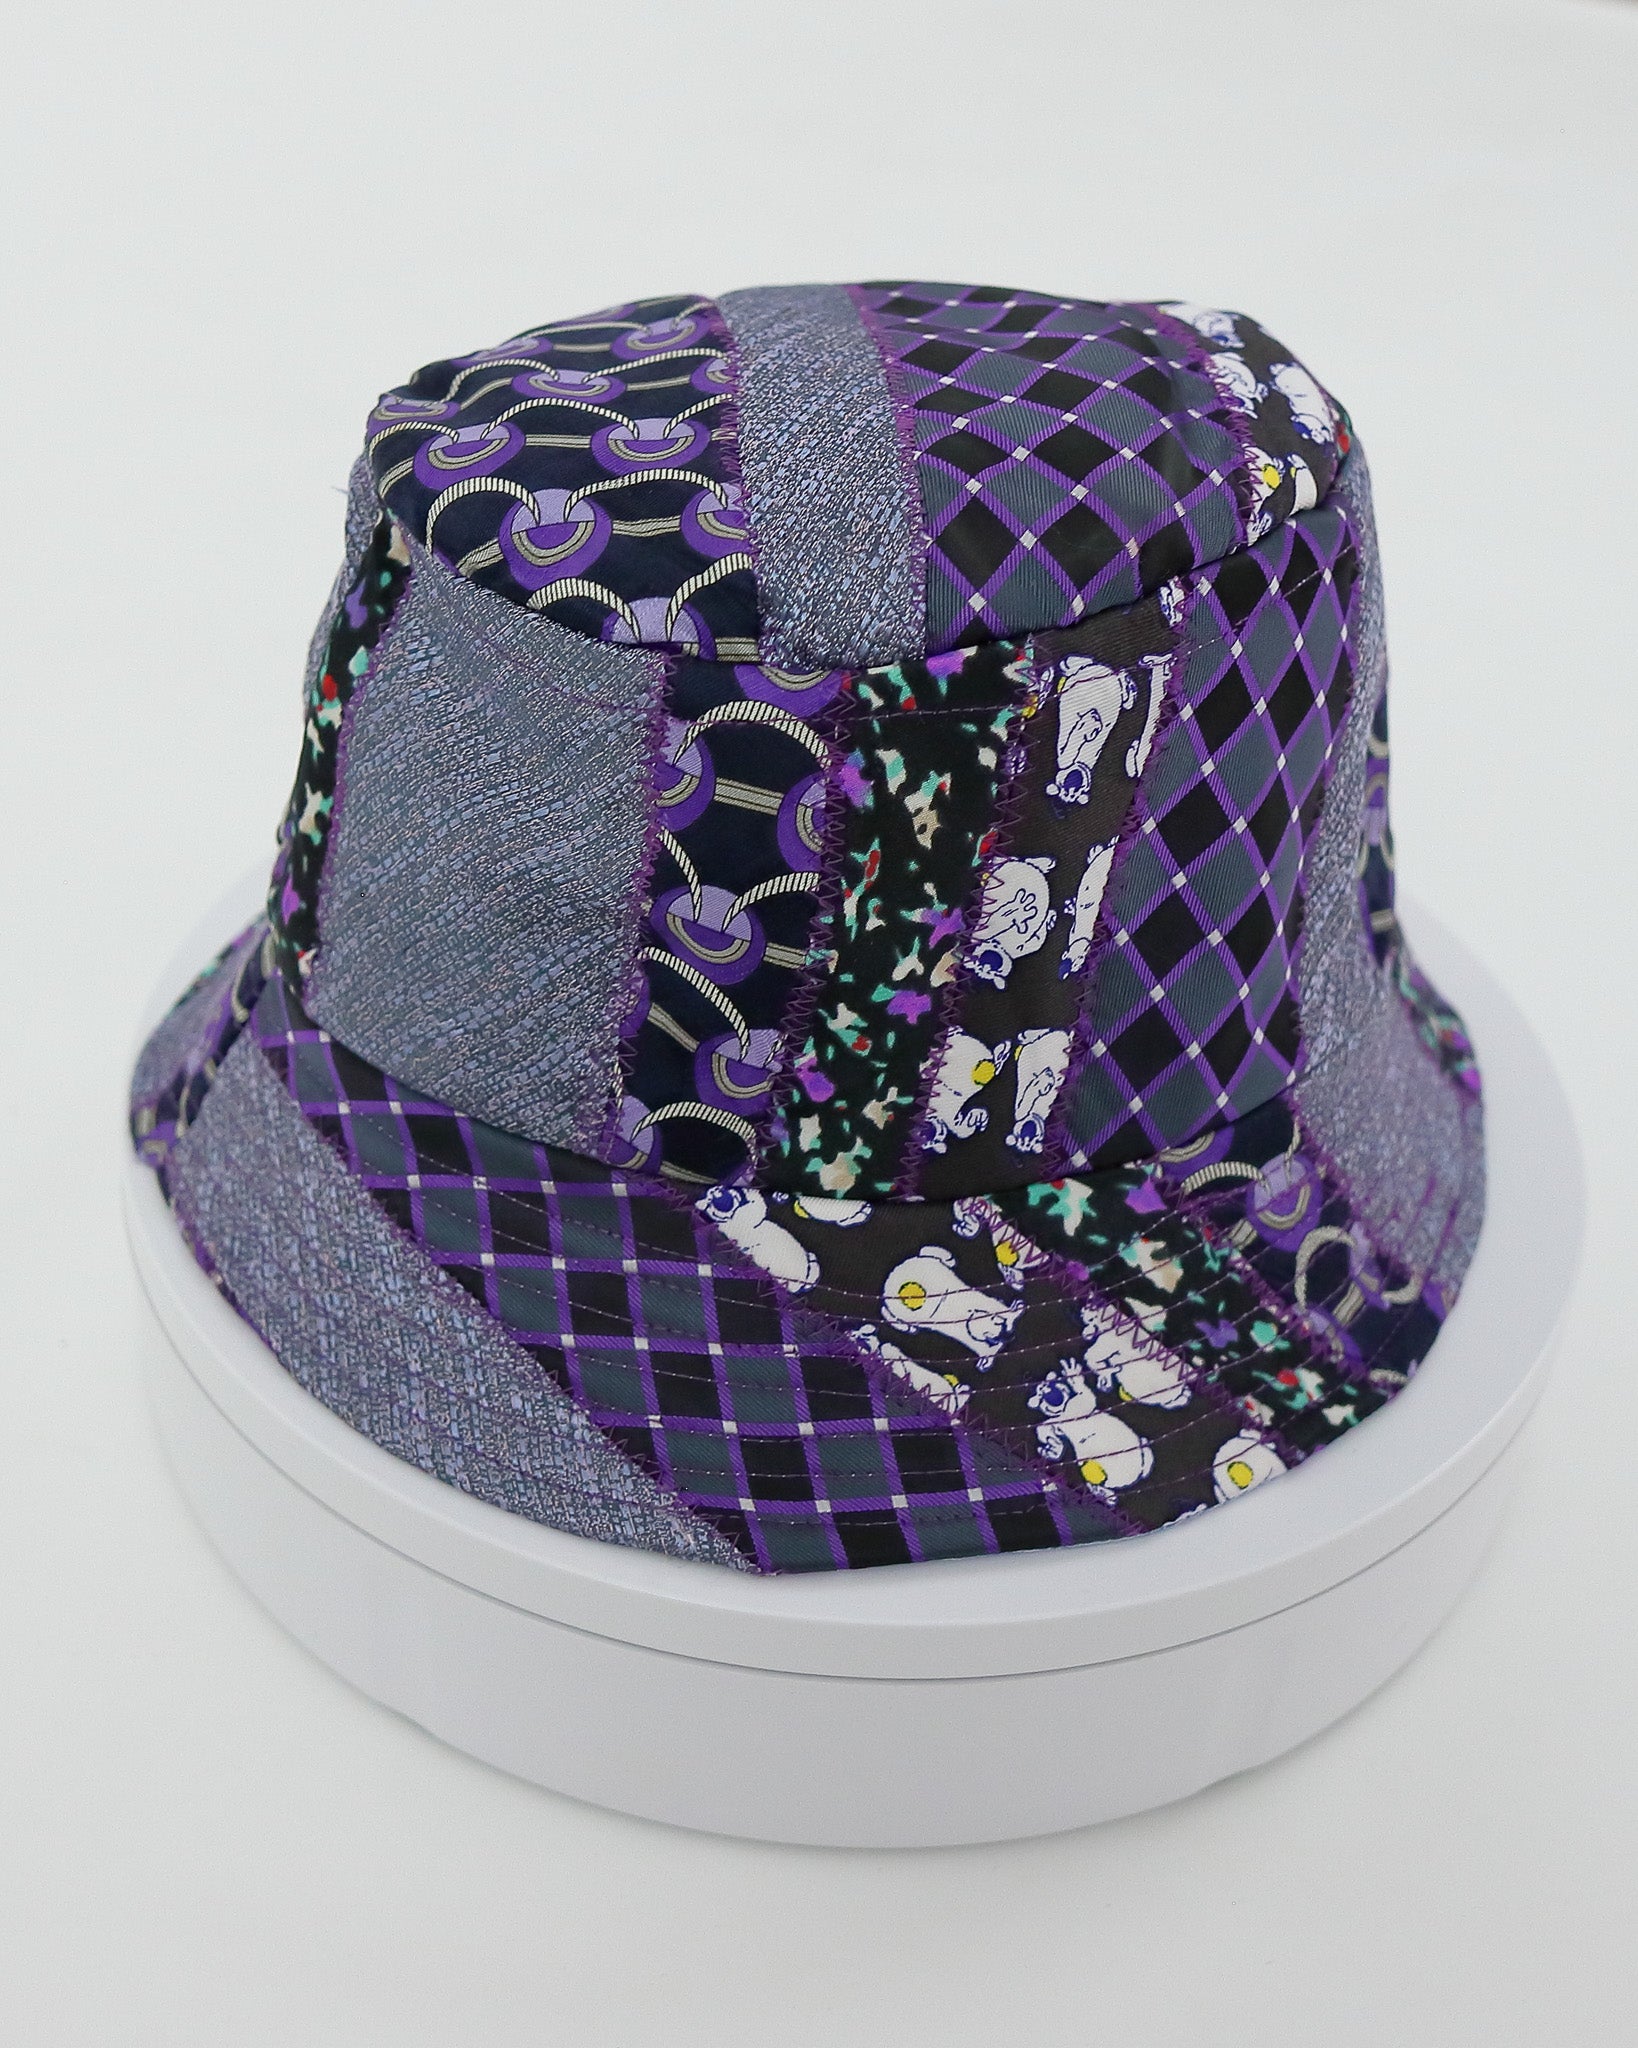 Purple Patterned Upcycled Tie Bucket Hat